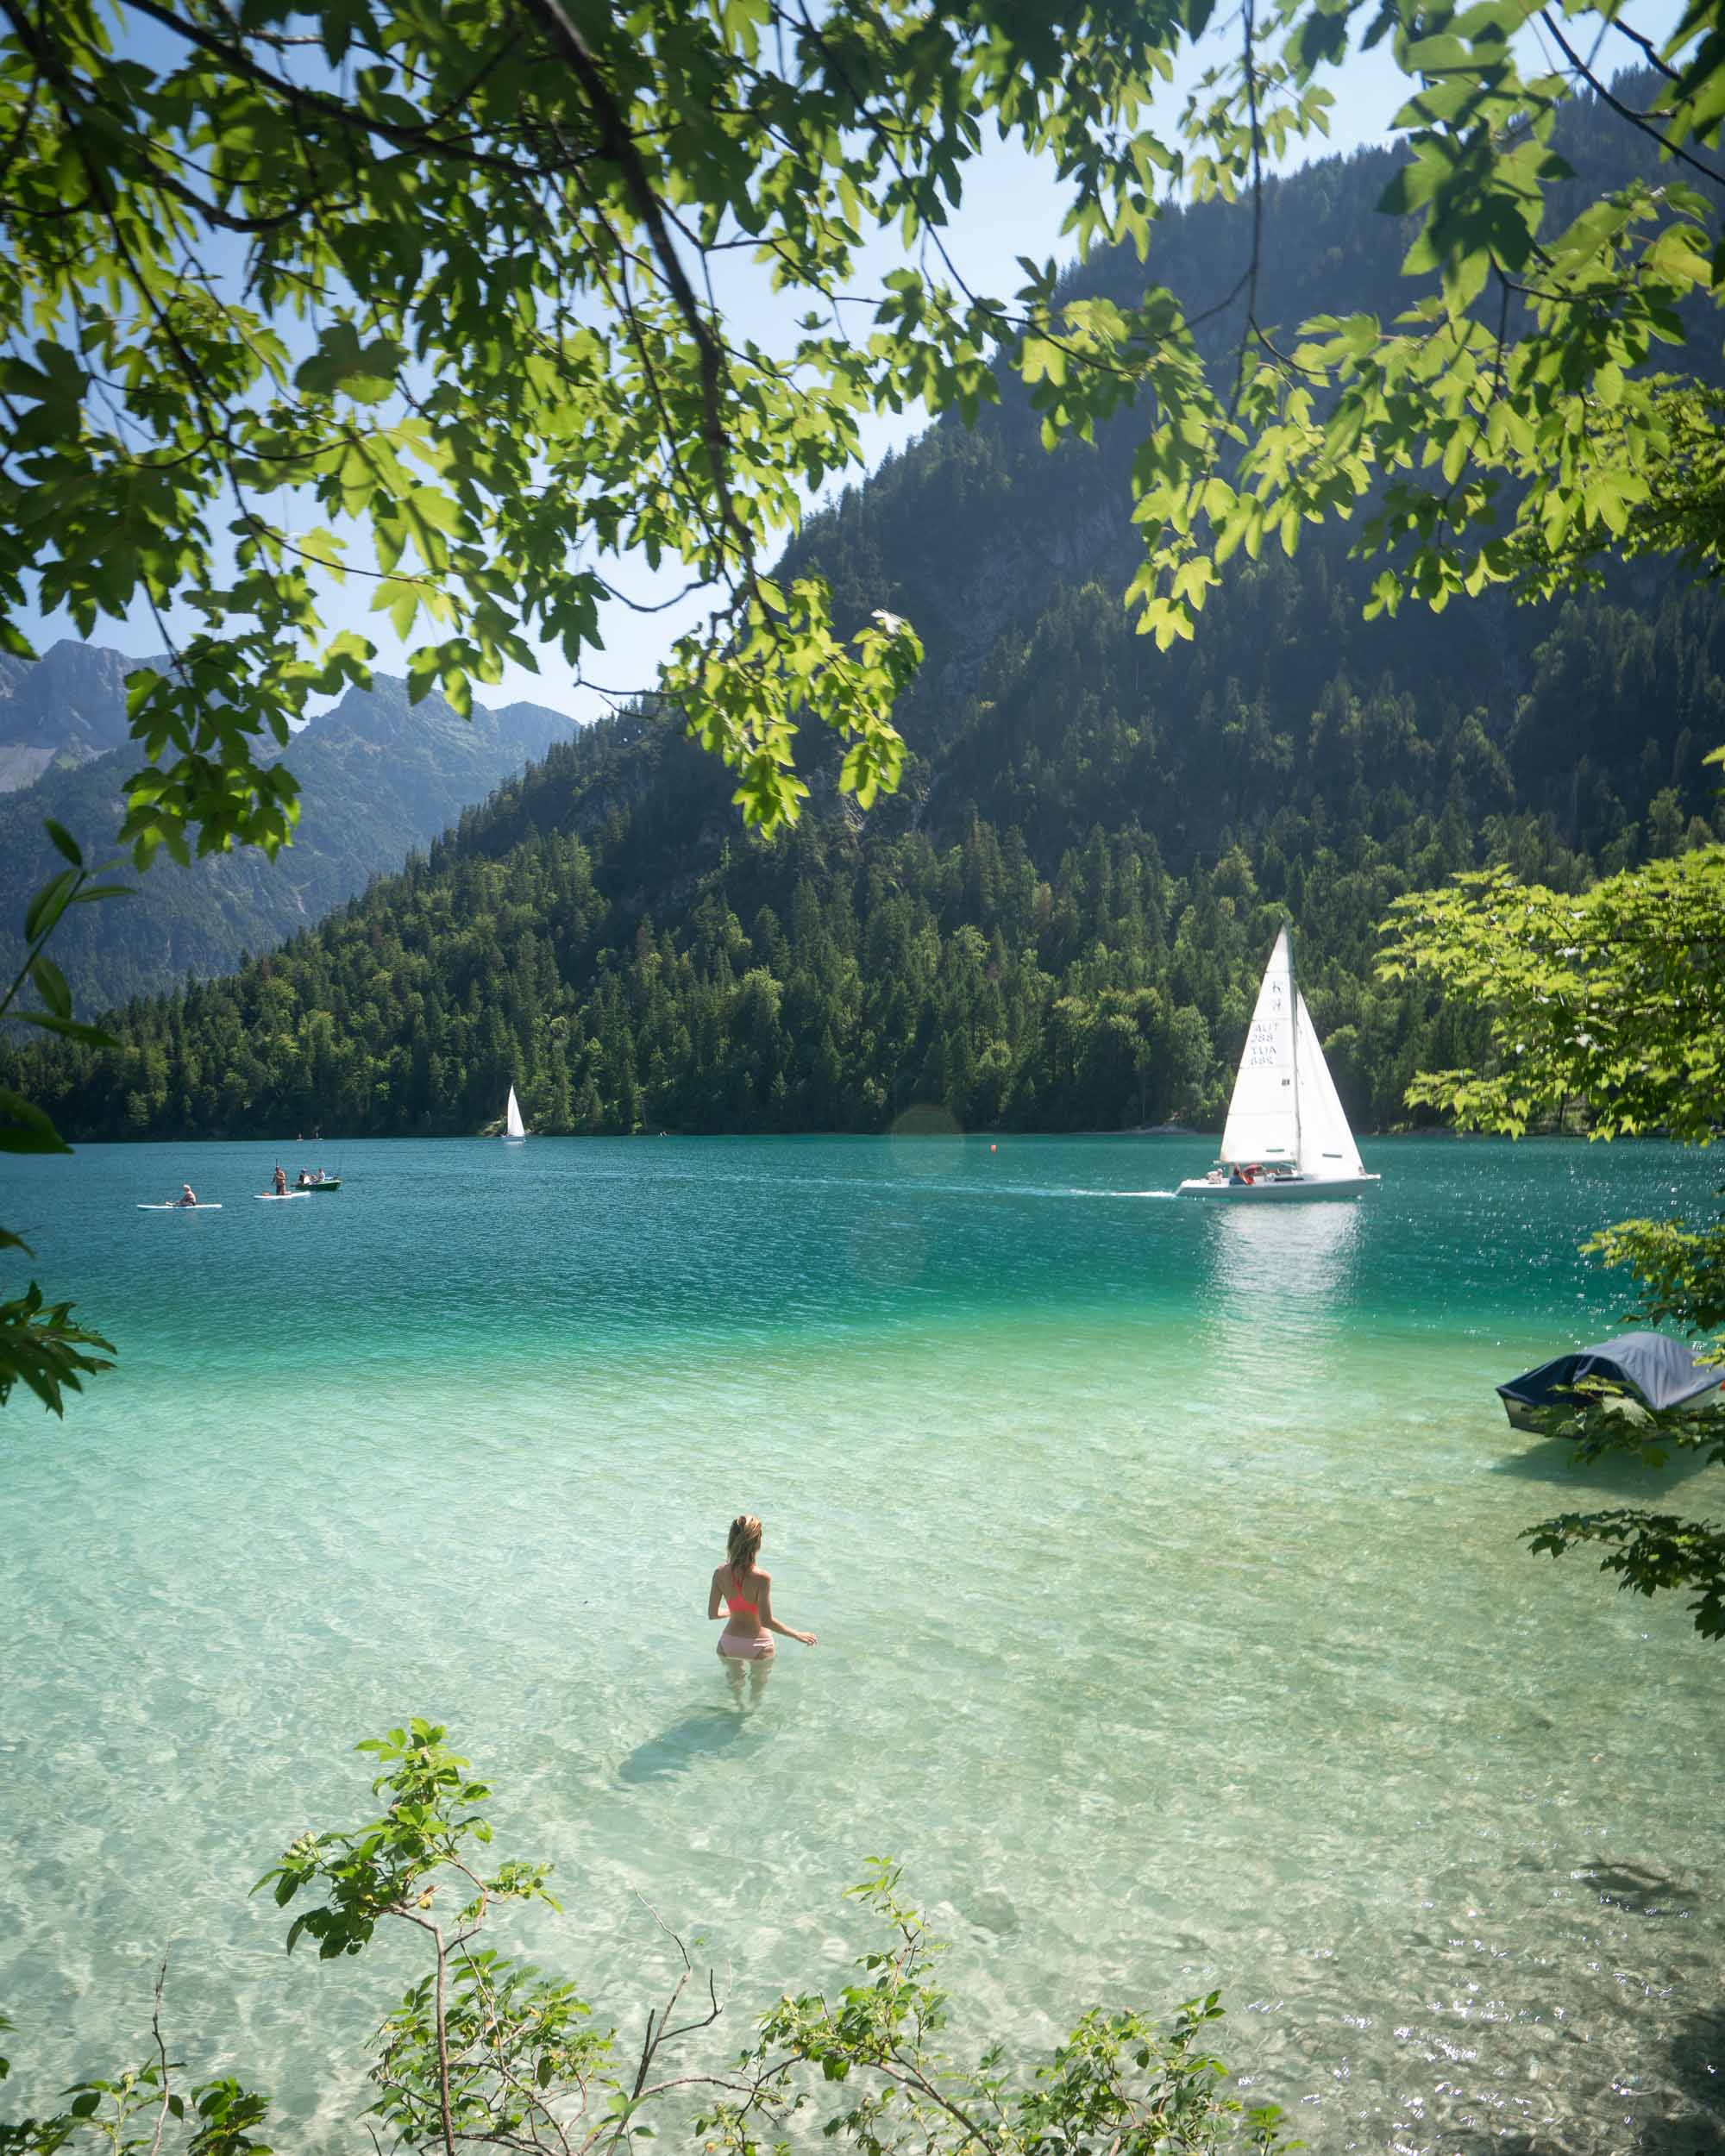 Plansee Lake in Austria.